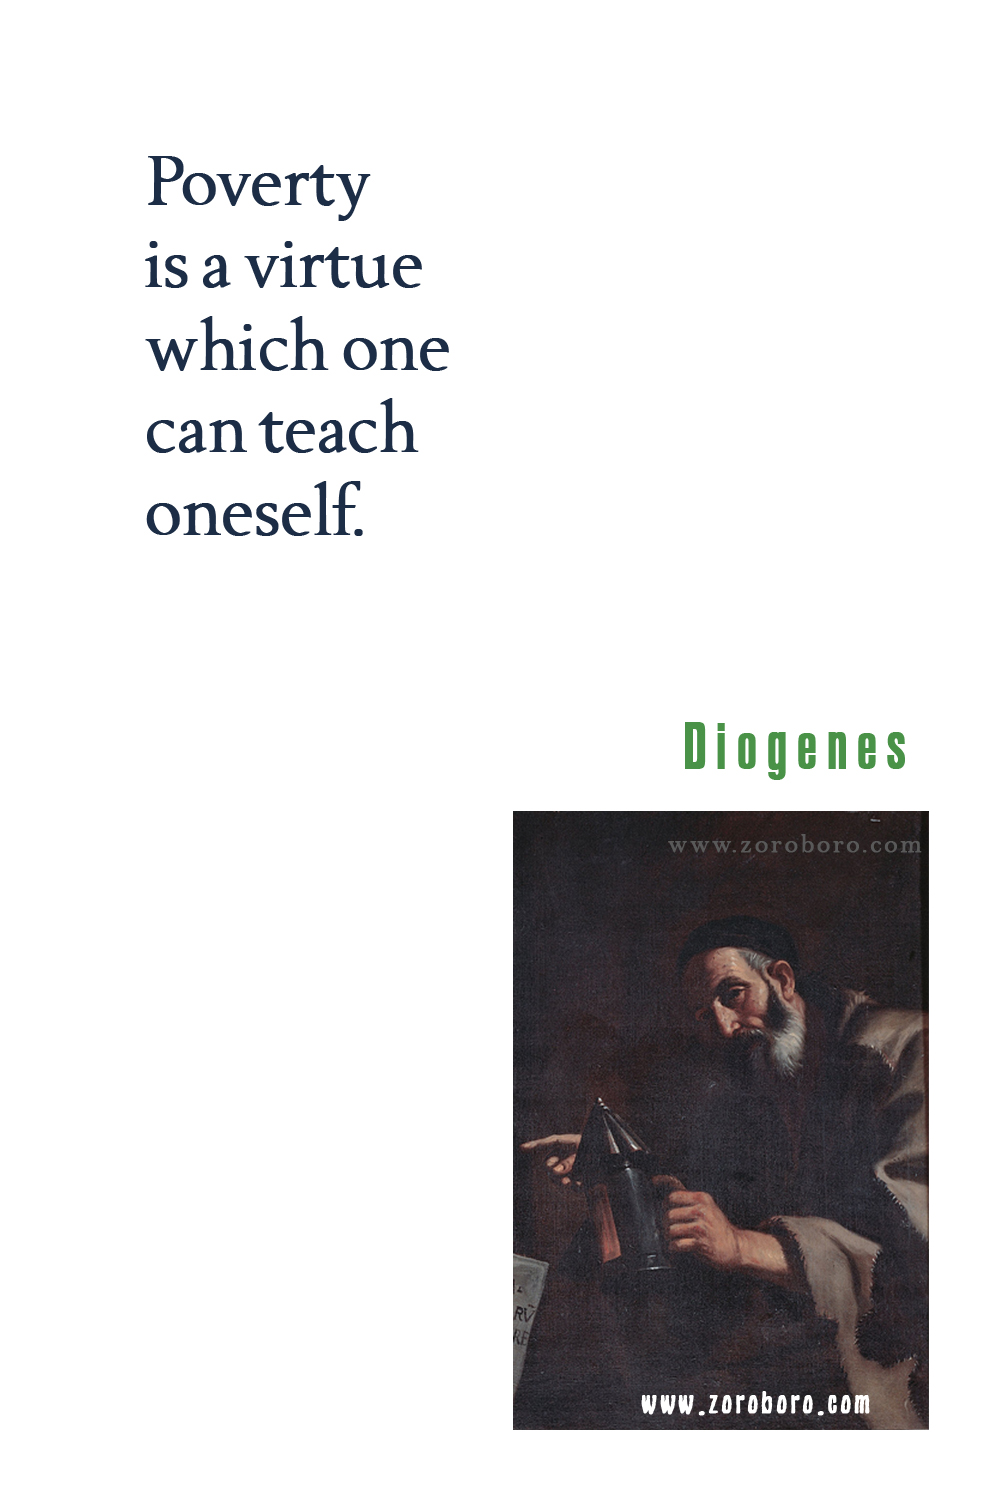 Diogenes Quotes. Diogenes Philosophy, Diogenes Books Quotes, Diogenes Dogs, Wisdom, Enemies, Friendship, & Virtue Quotes. Diogenes